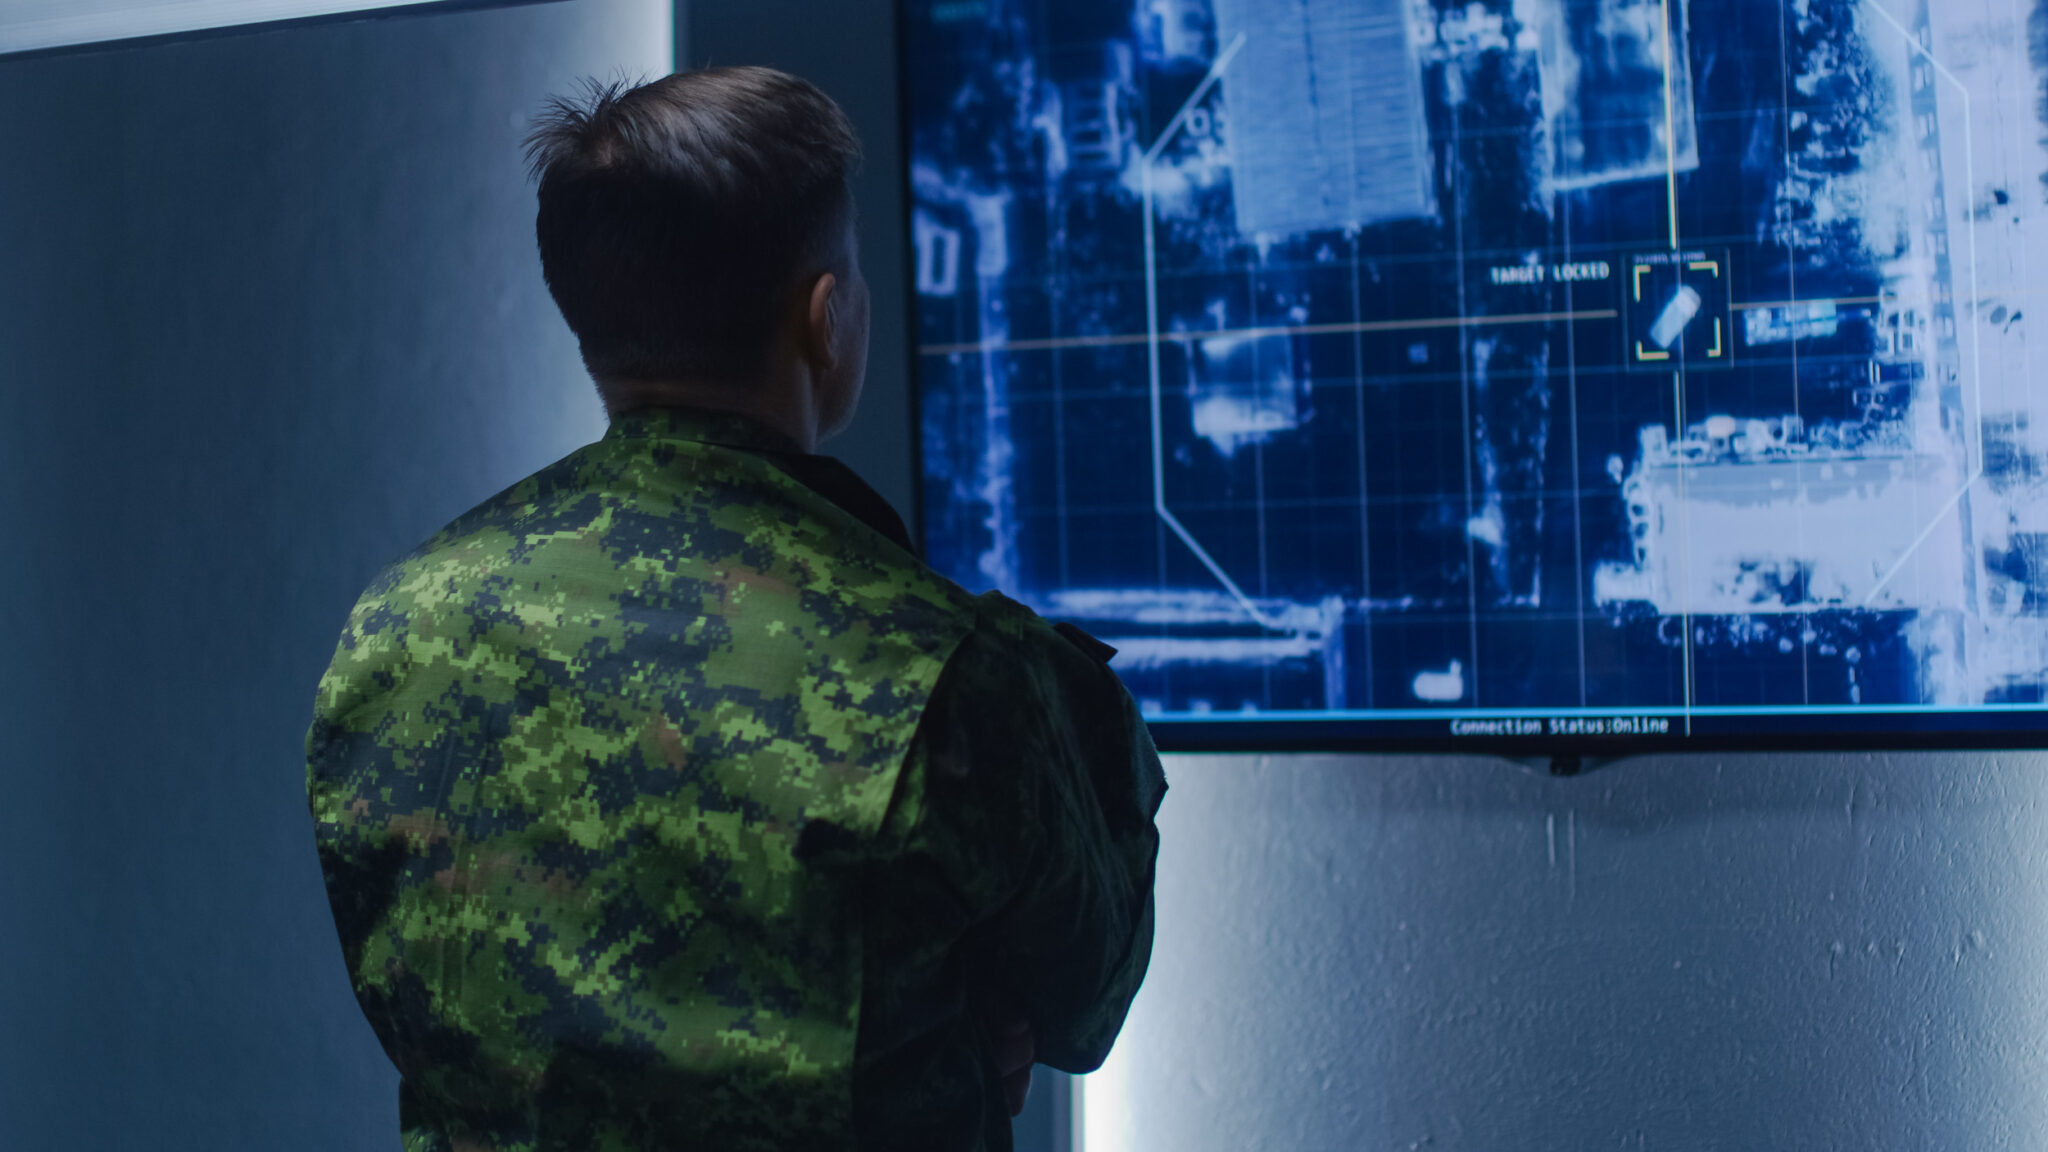 Military Man / Army Officer Watches Satellite Surveillance Footage / Car Tracking of the Target on Wall TV Screen. Secret Military Spying Operation in the Surveillance Center / System Control Room.